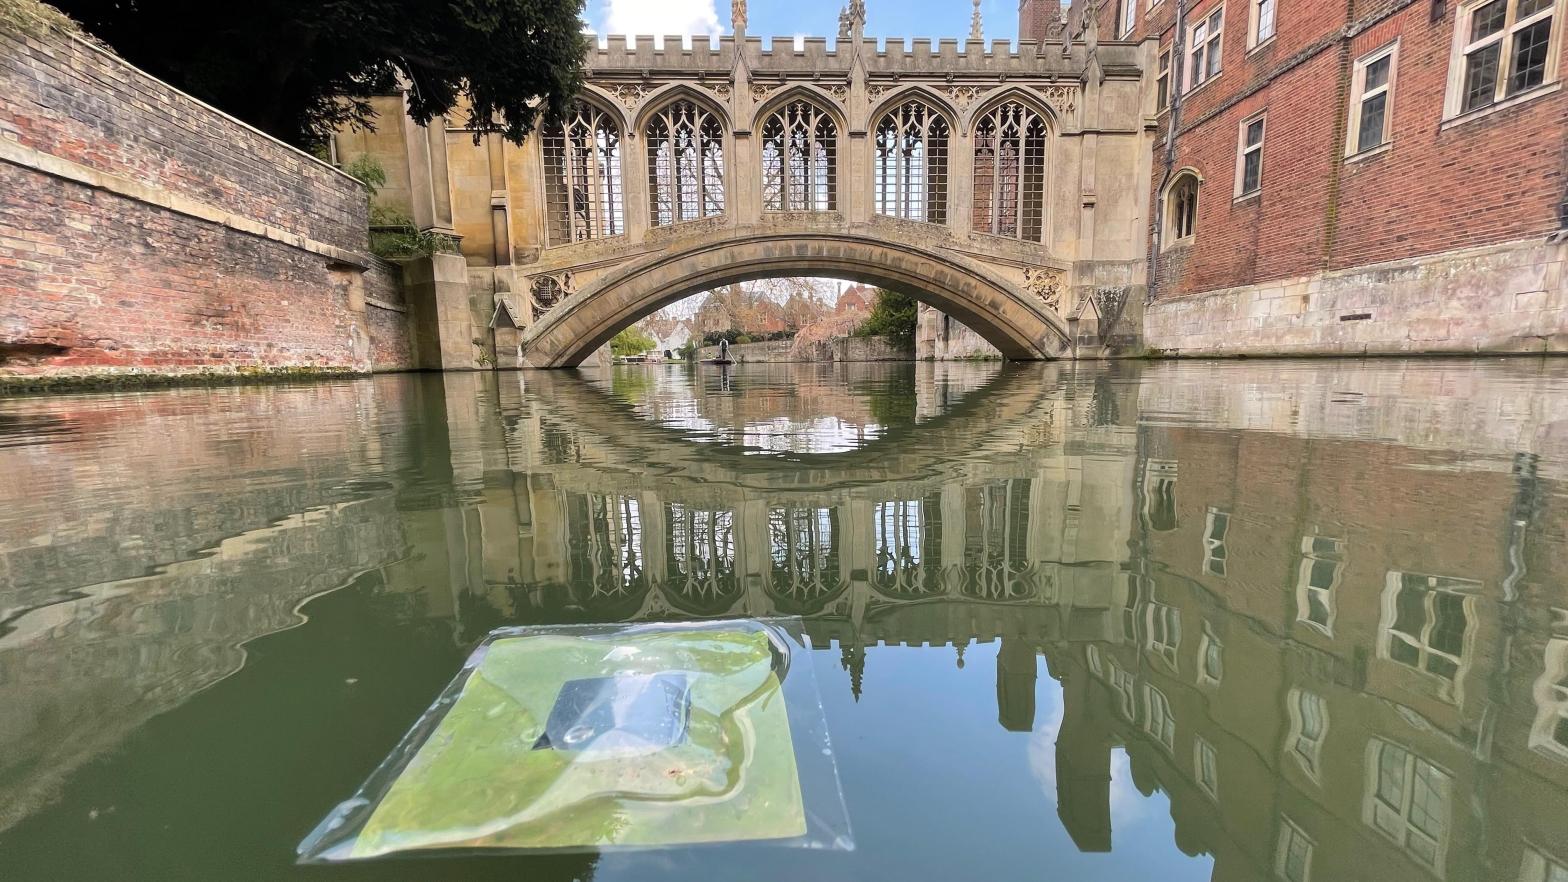 One of the artificial leaves floating on the River Cam near the Bridge of Sighs in Cambridge. (Photo: Virgil Andrei)